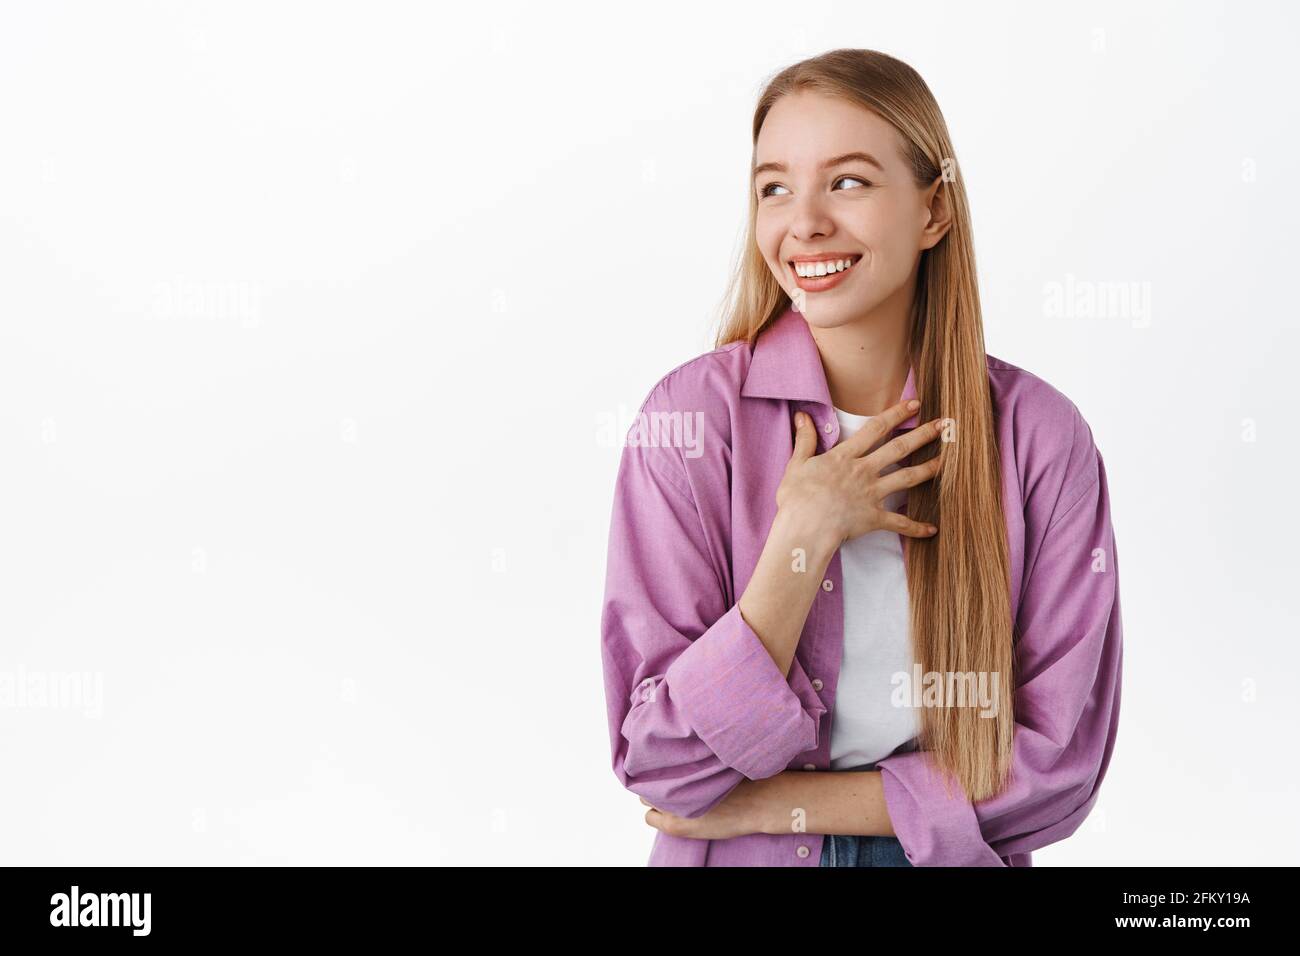 Smiling candid girl, looking aside, laughing with natural happy face emotion, touching chest, chuckle over something funny, standing against white Stock Photo